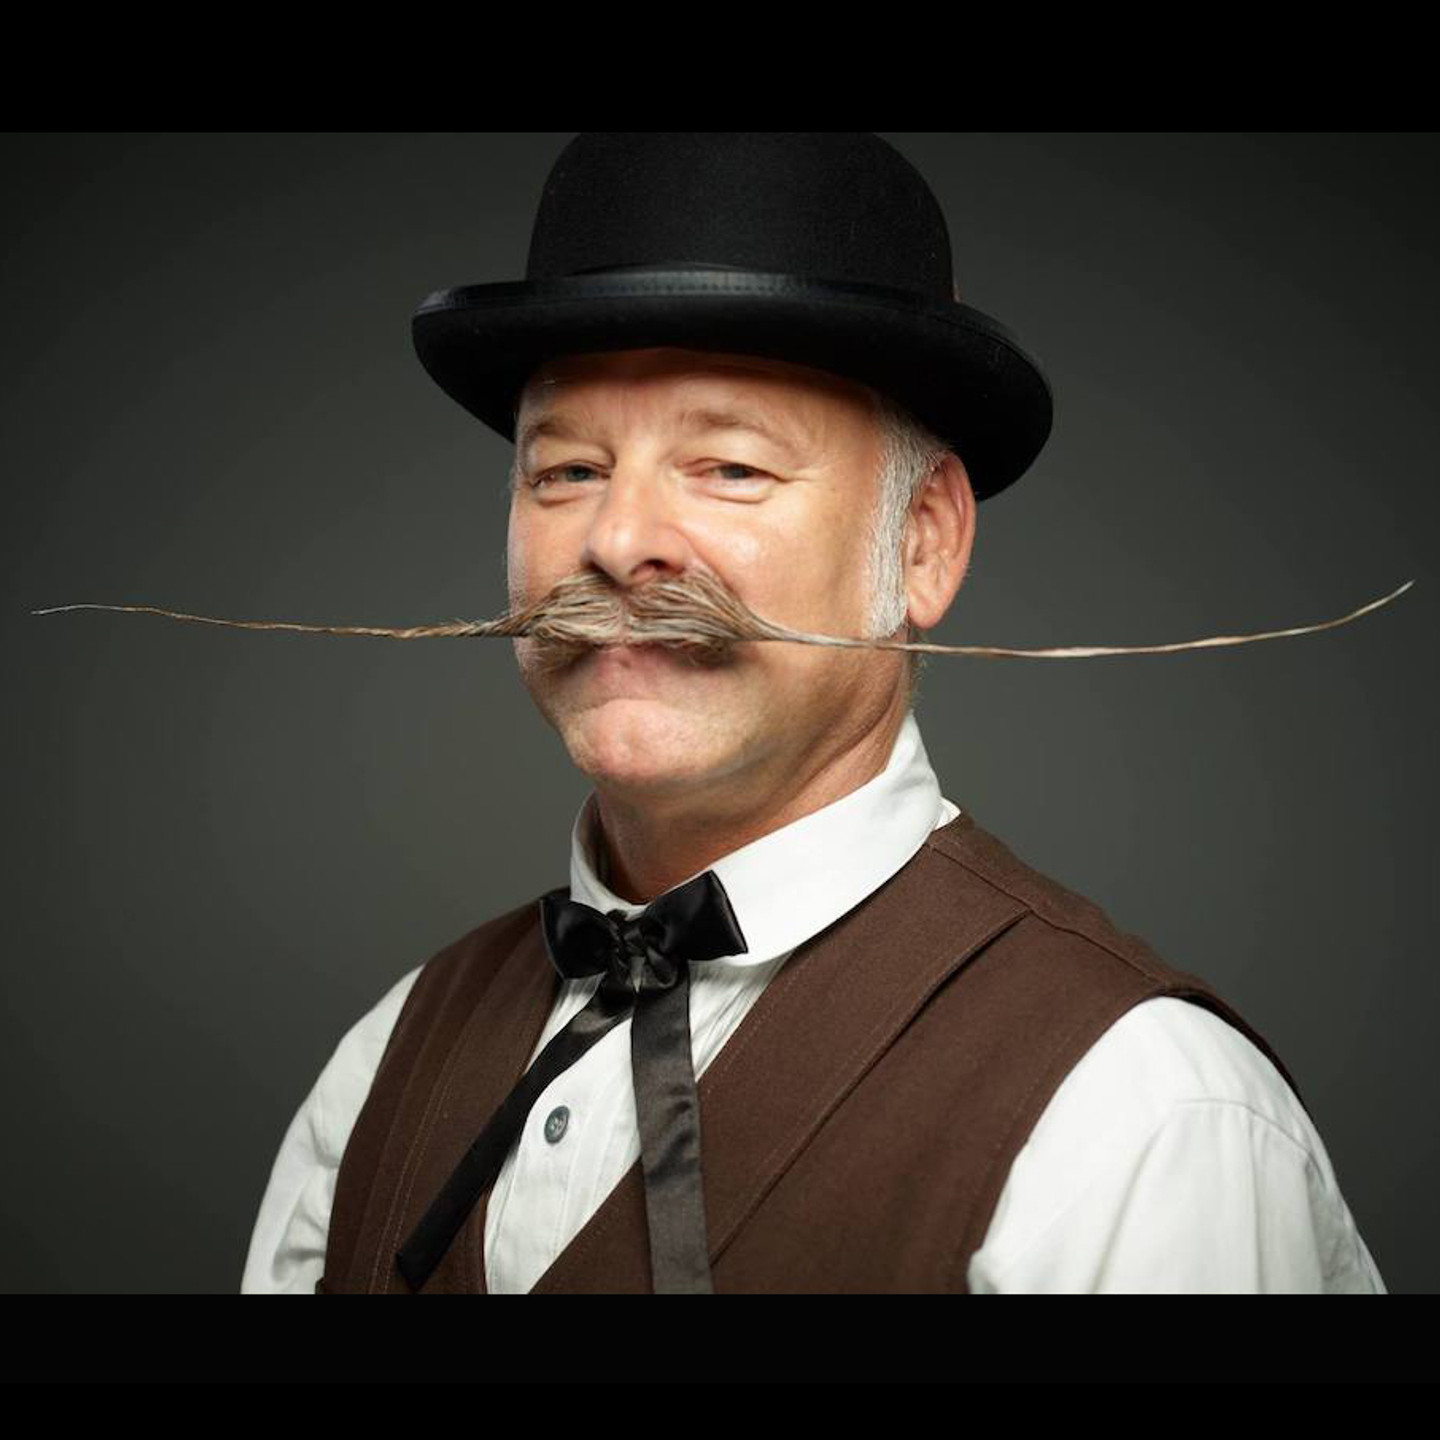 Local Man From Summerville Sets New Guinness World Record For The Longest Mustache Usa